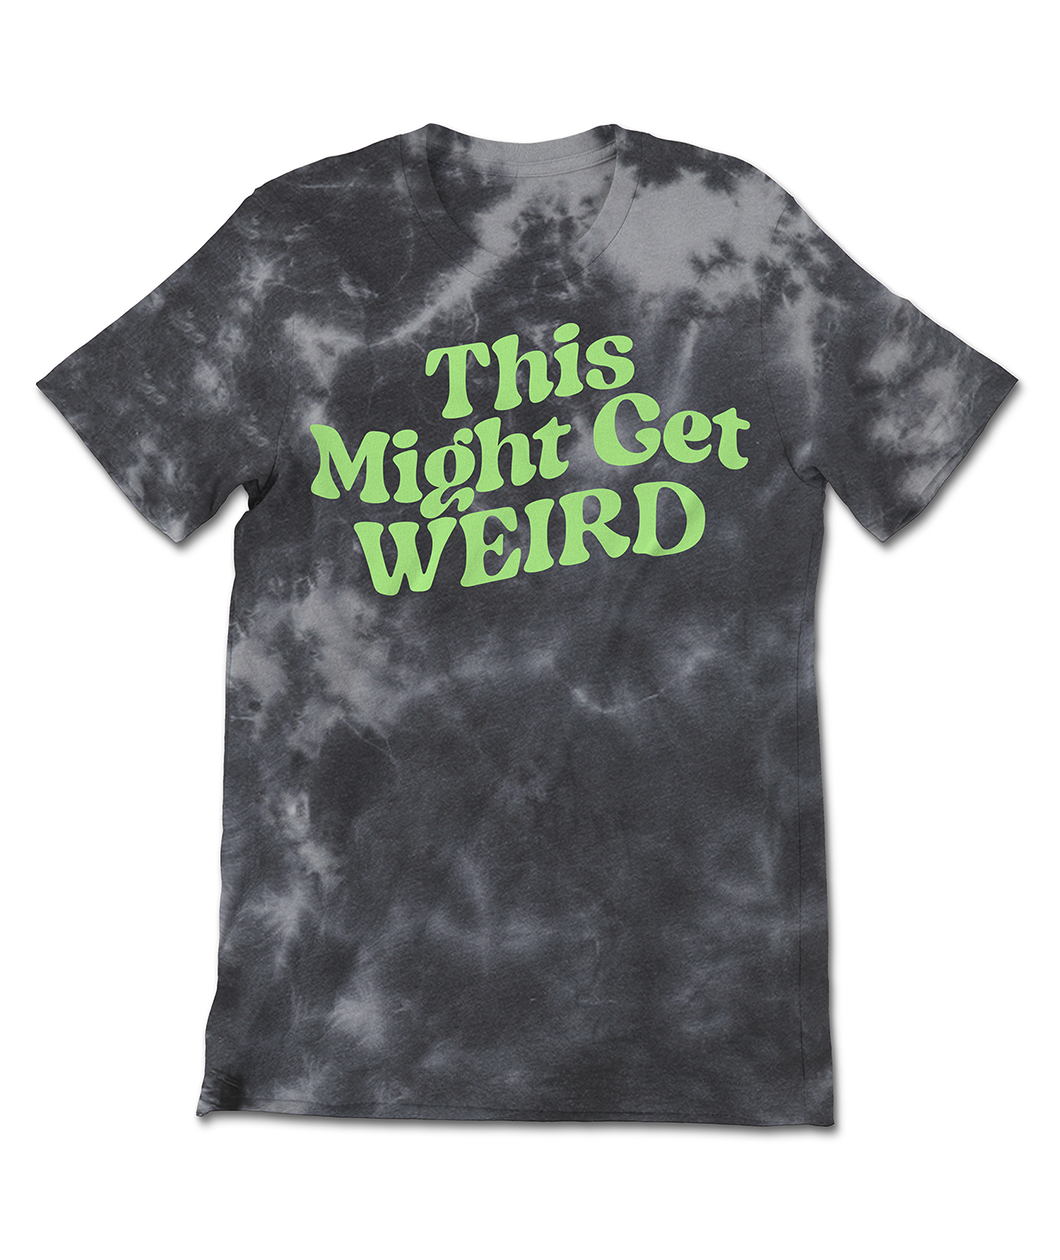  A black and grey tie dye shirt with fun, curvy lime green text that reads 